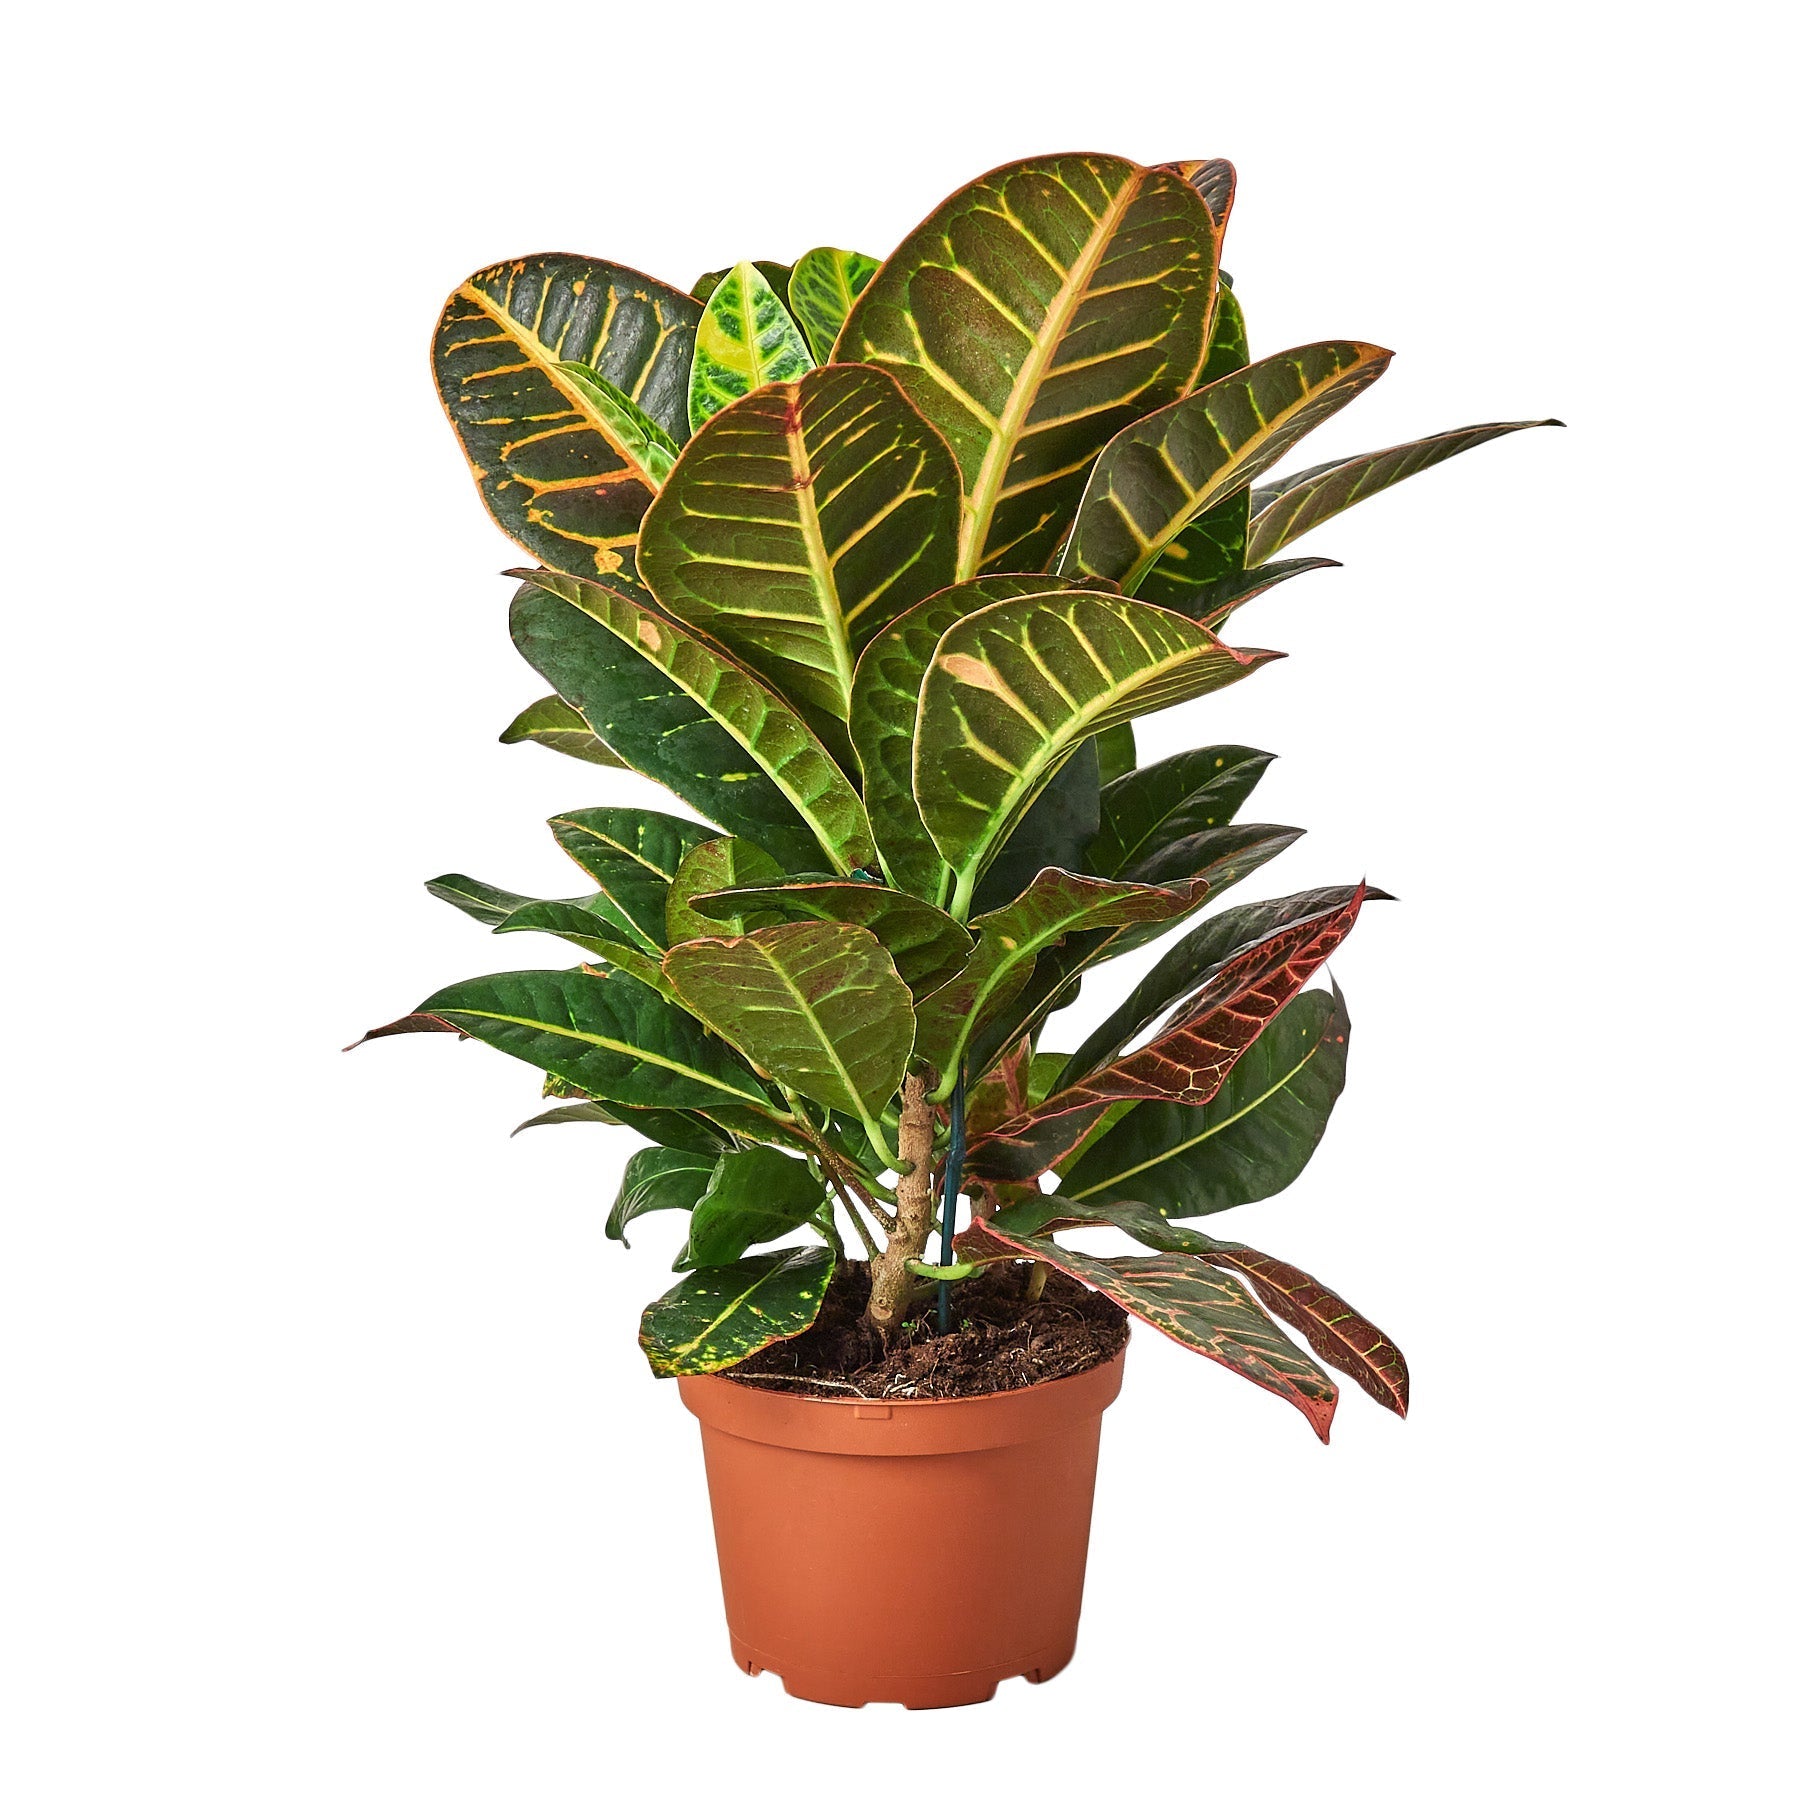 A potted plant with colorful leaves on a white background available at the best garden center near me.